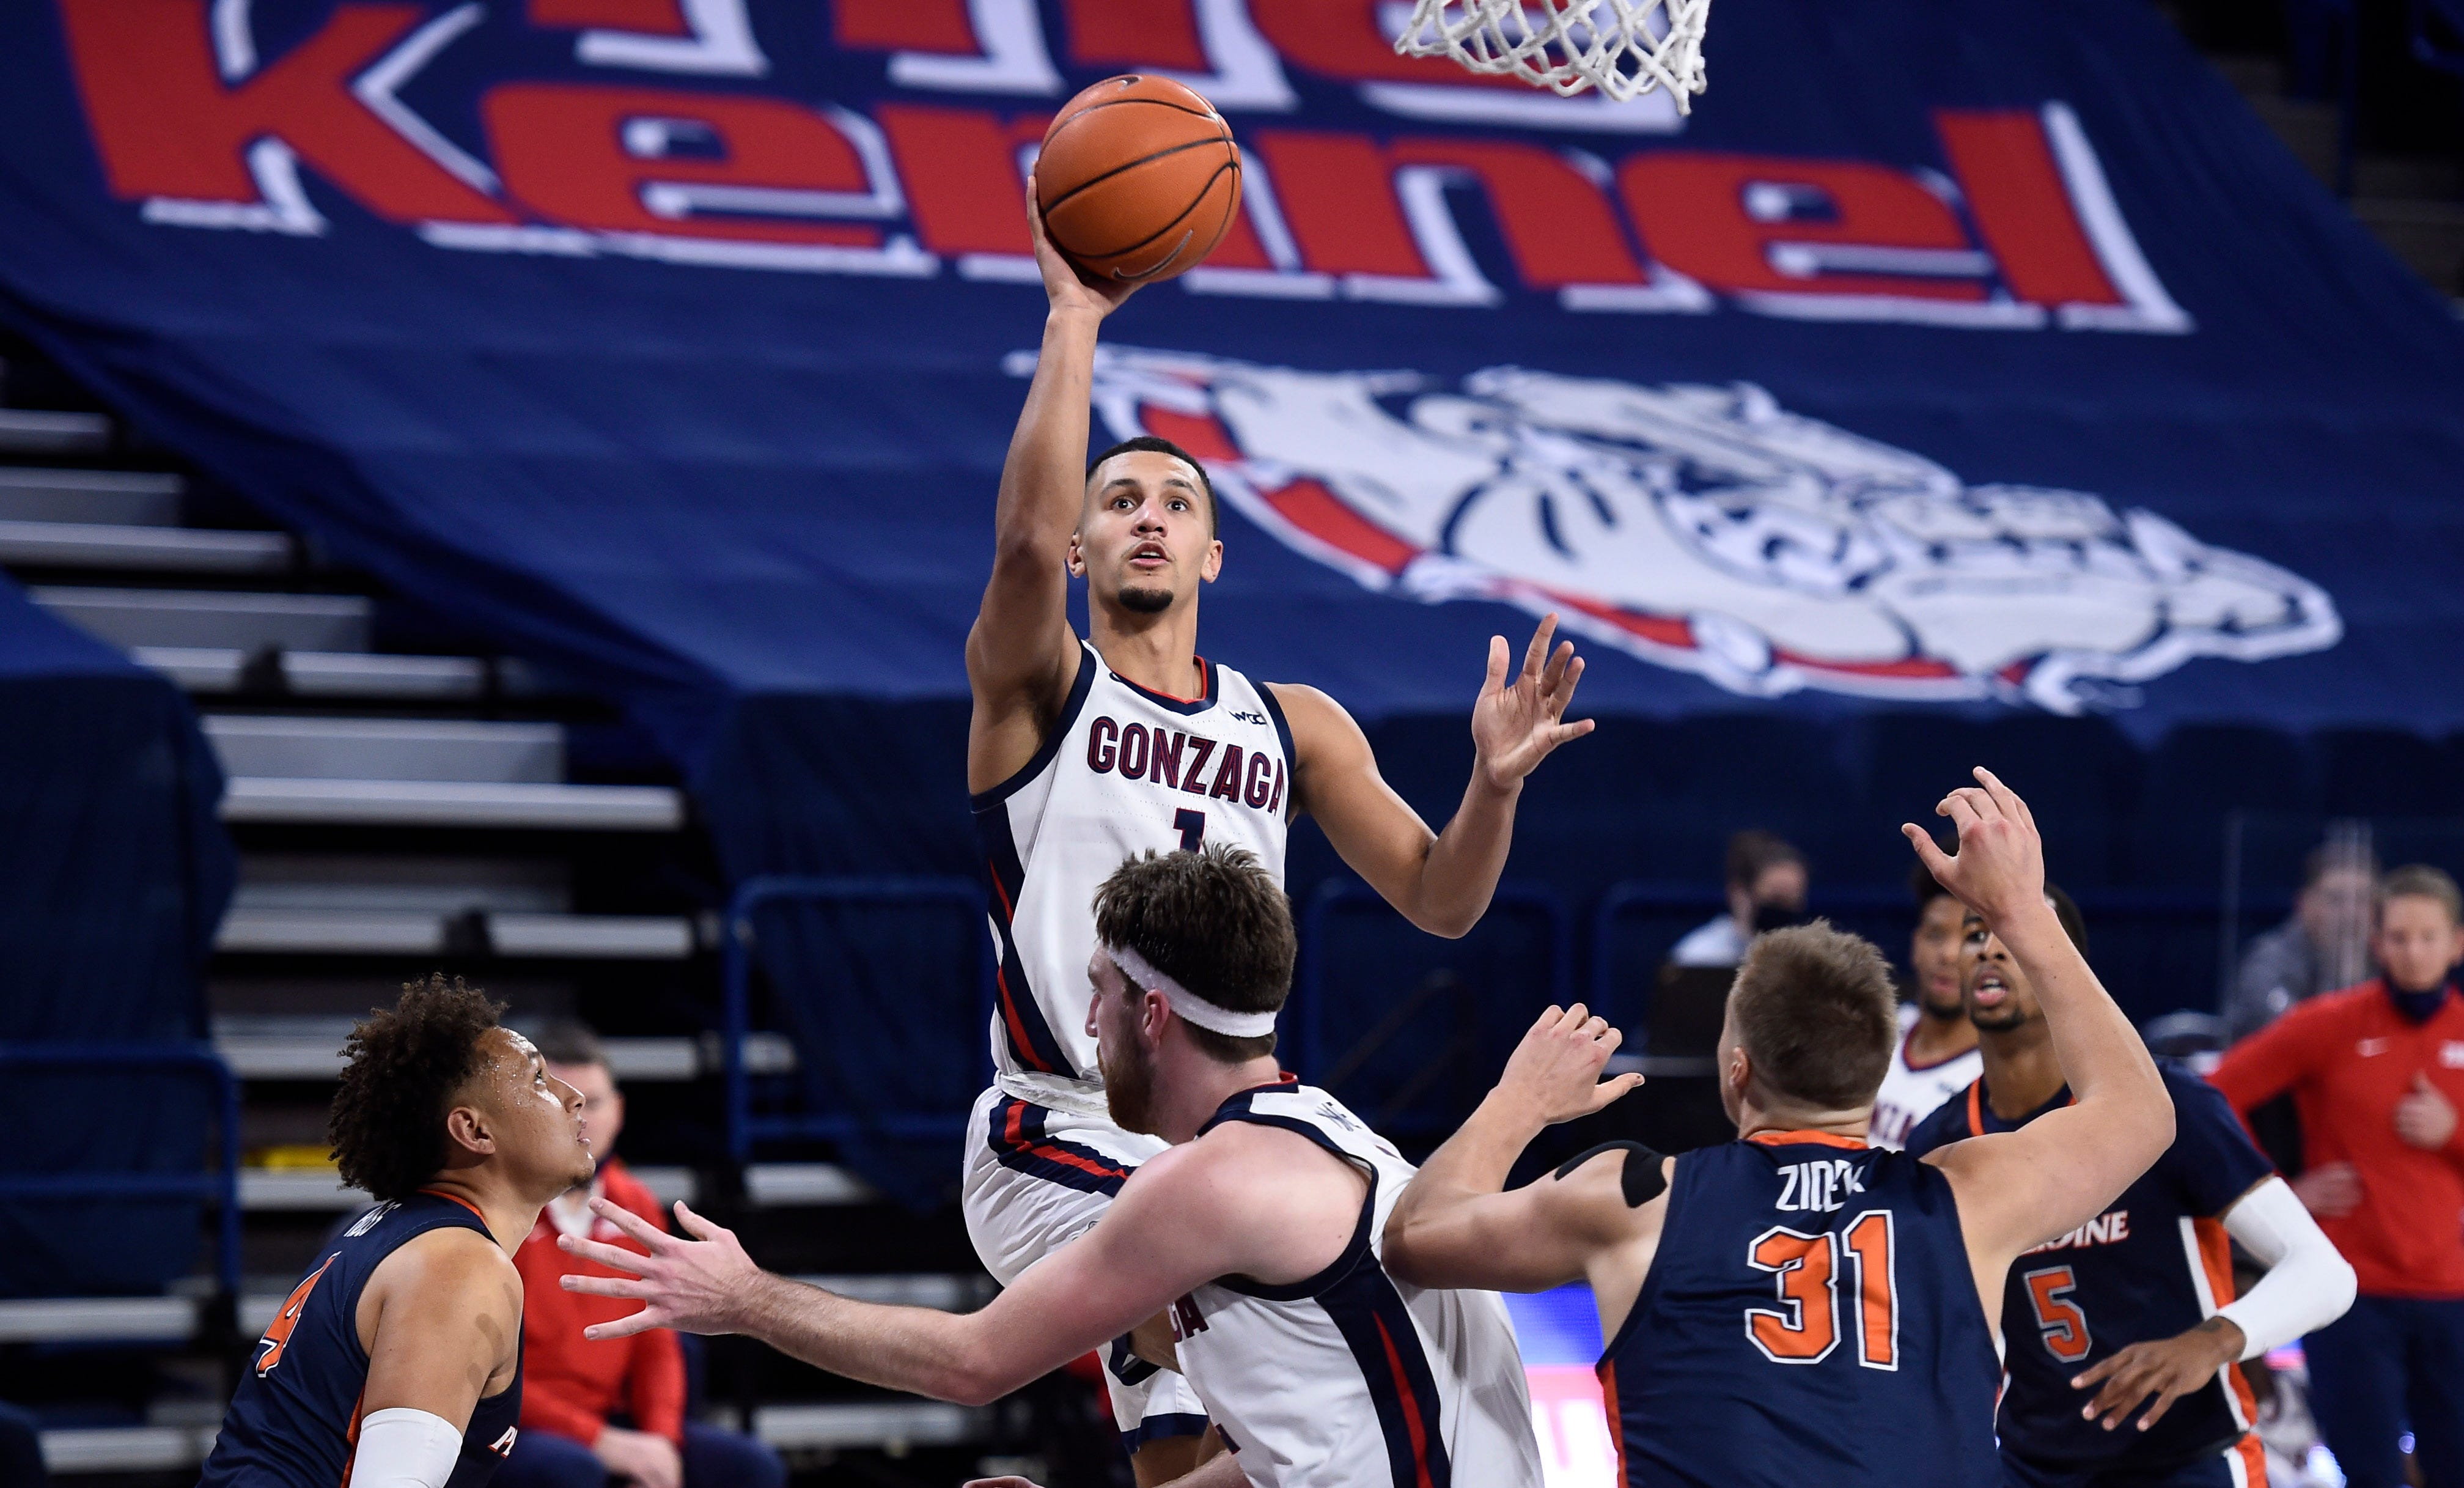 Undefeated Gonzaga remains at the top of the Ferris Mowers Men's Basketball Coaches Poll